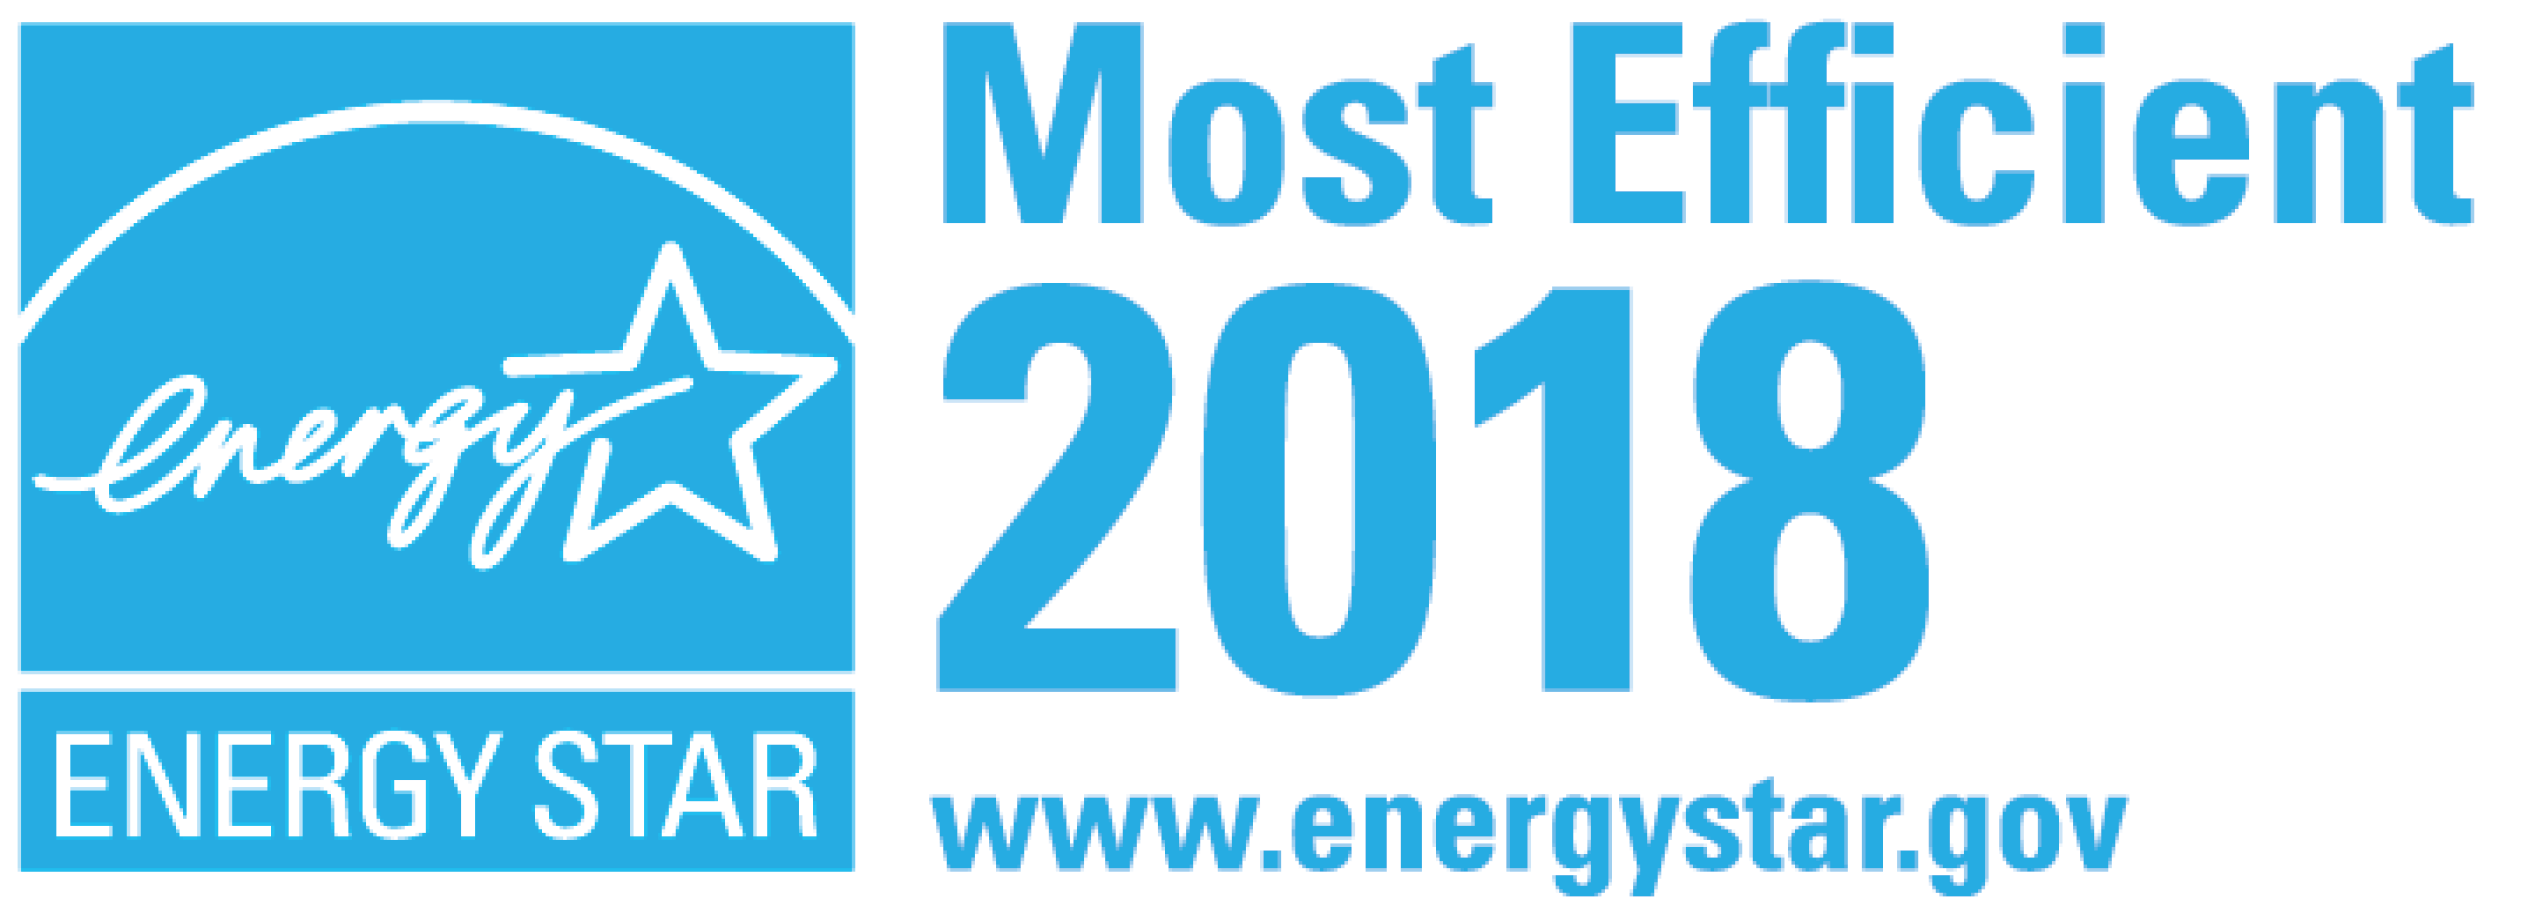 ENERGY STAR Most Efficient Recognition